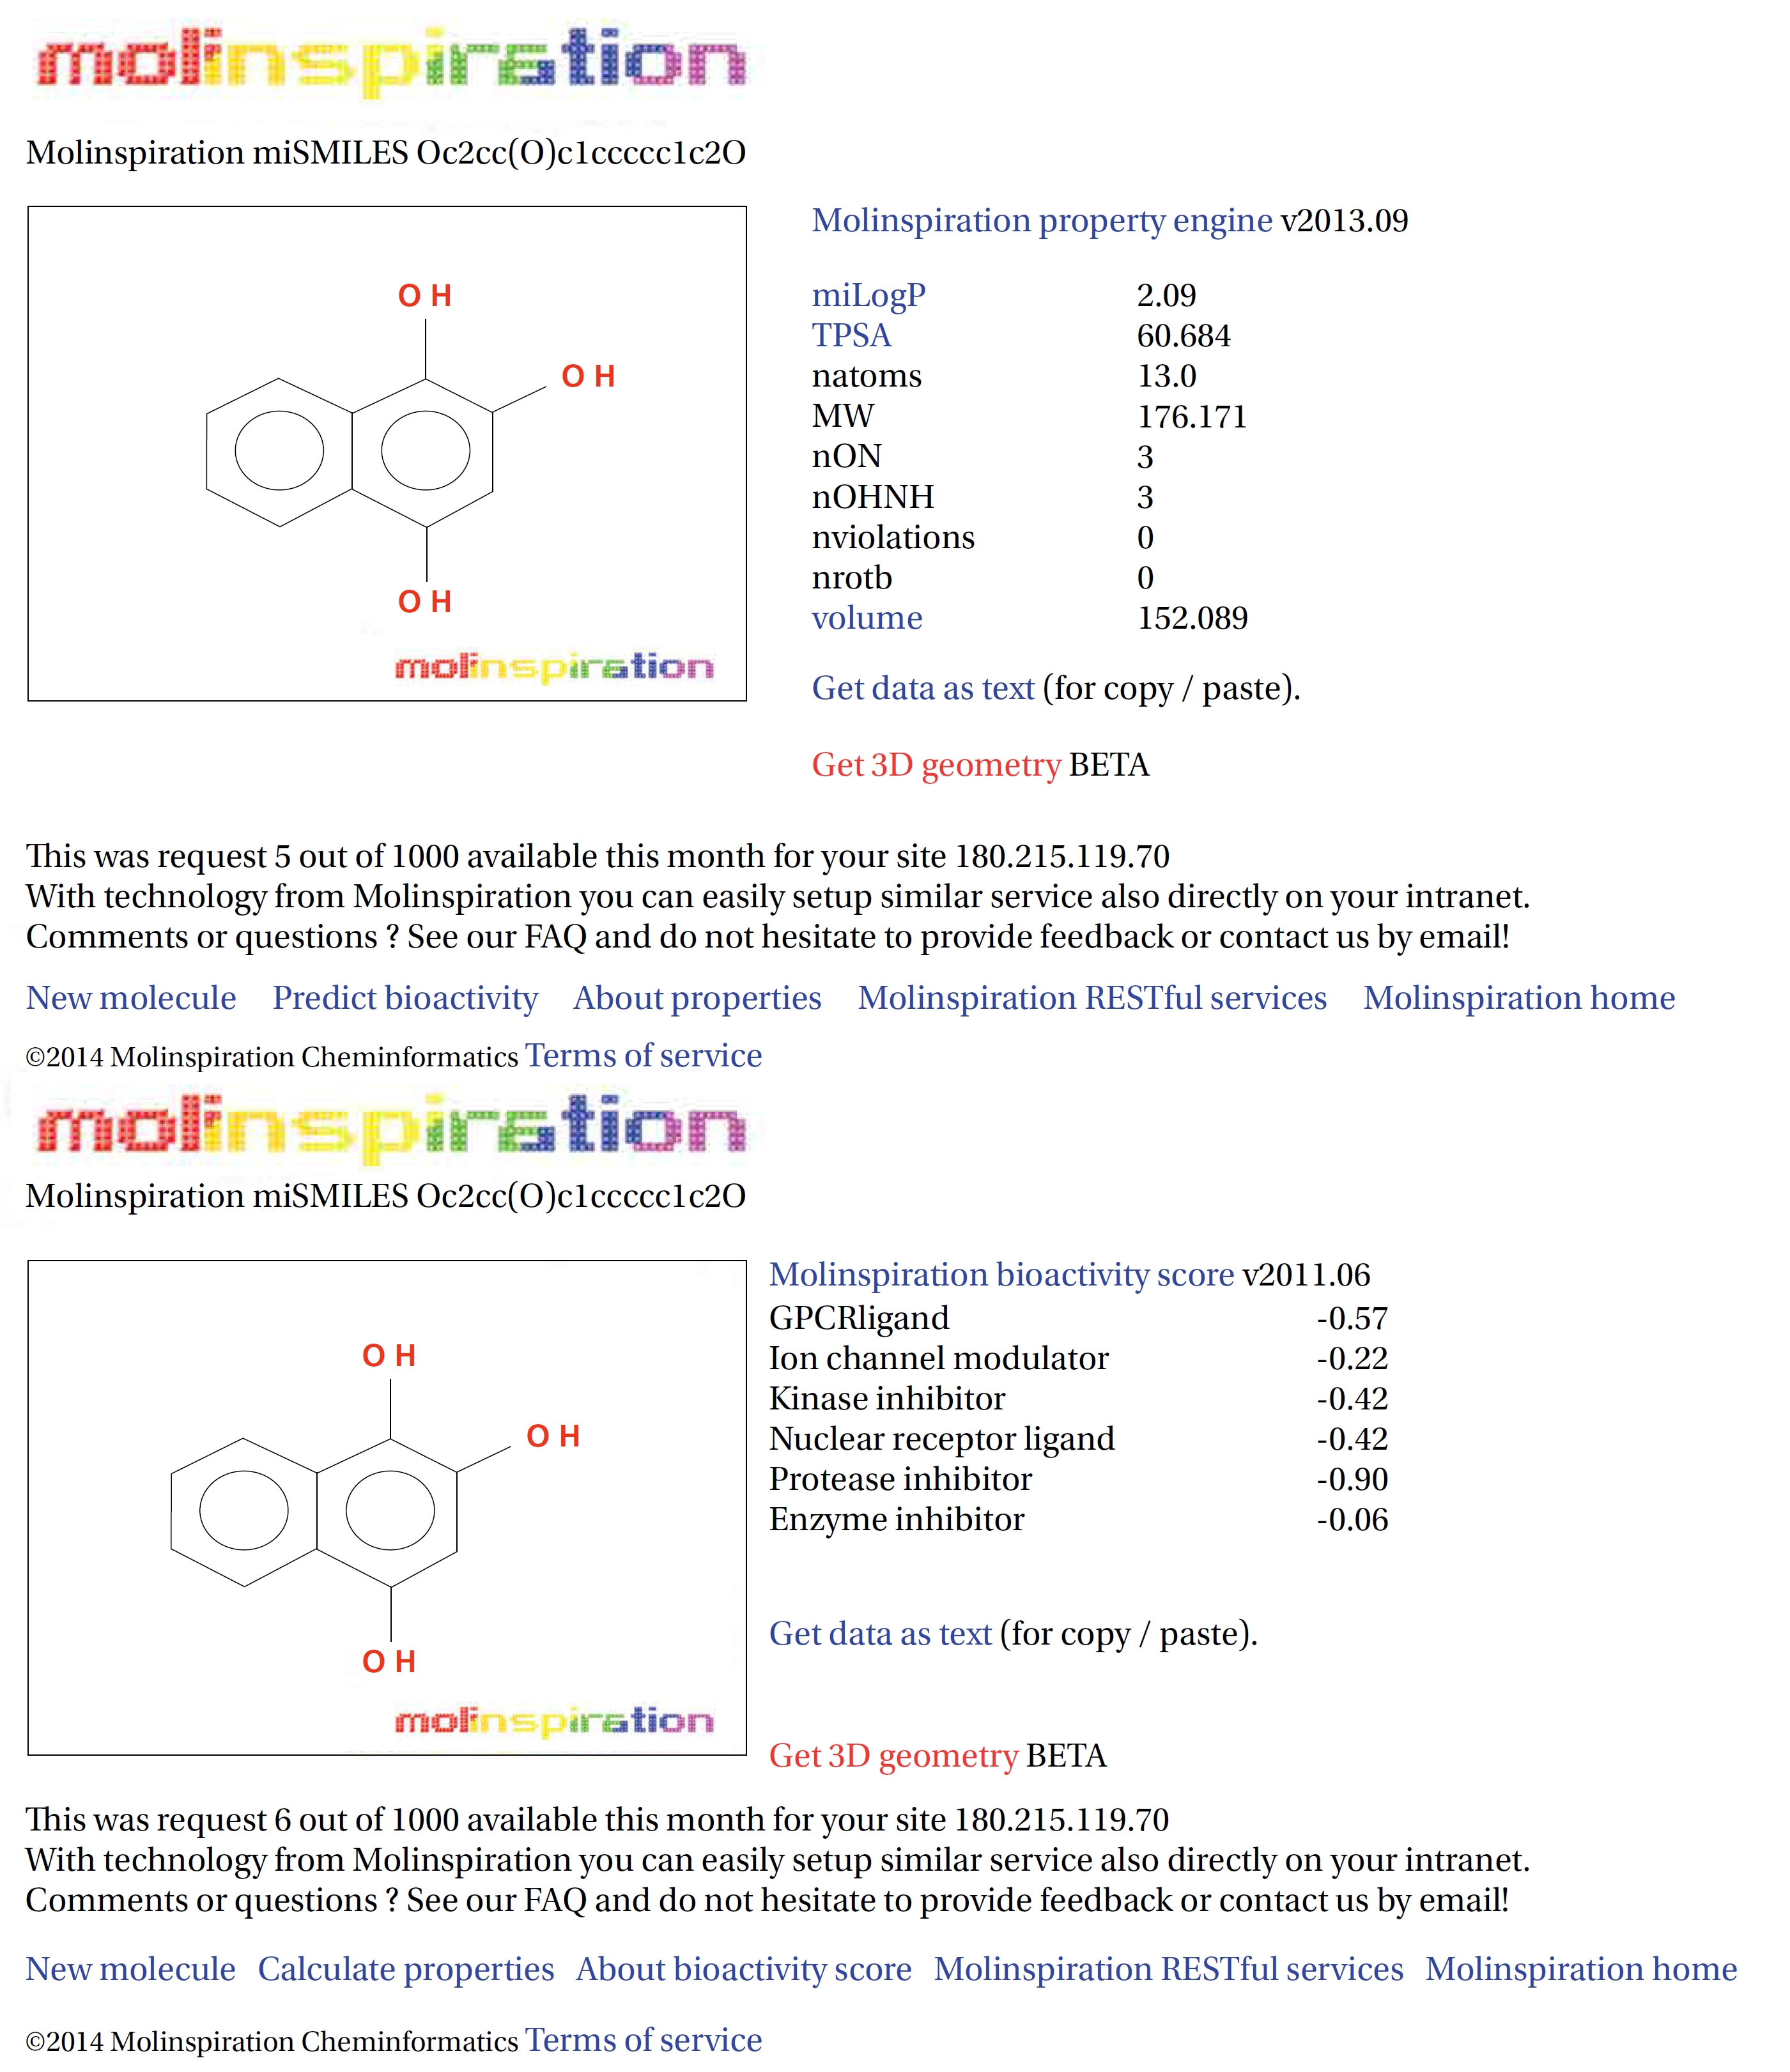 Molinspiration computational evaluations of the molecular properties and the bioactivity of THN.